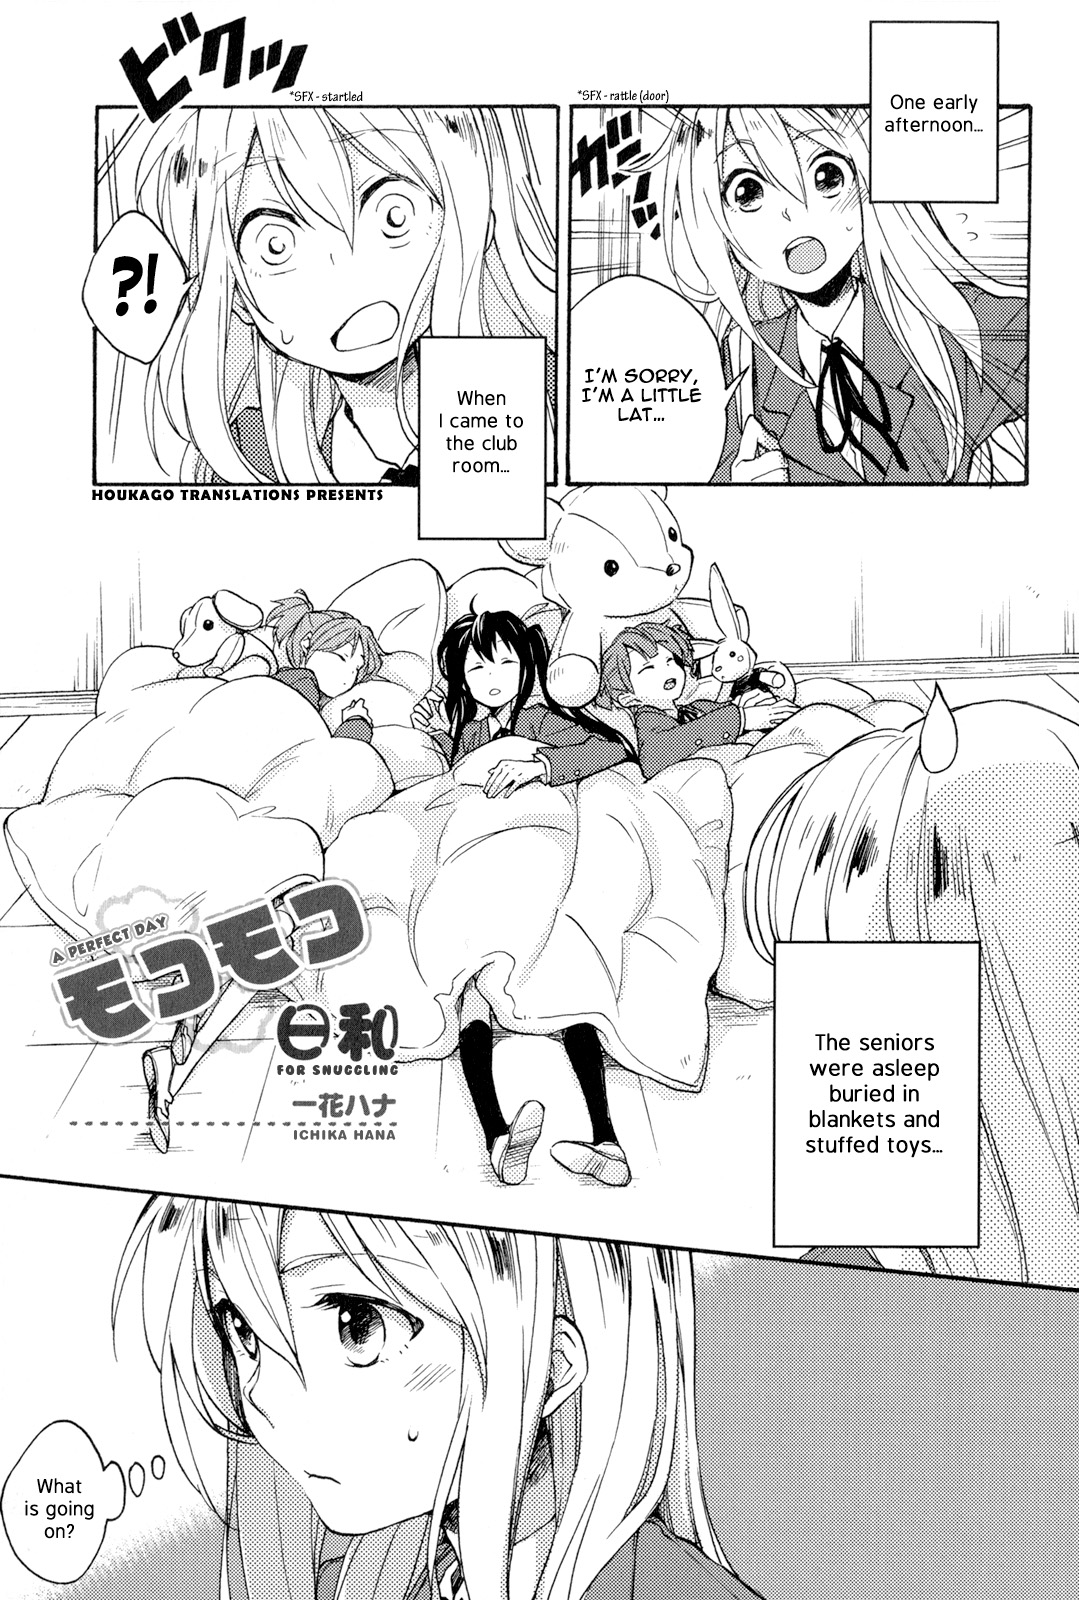 K ON! Story Anthology Comic Vol. 2 Ch. 19 A Perfect Day For Snuggling (by Ichika Hana)